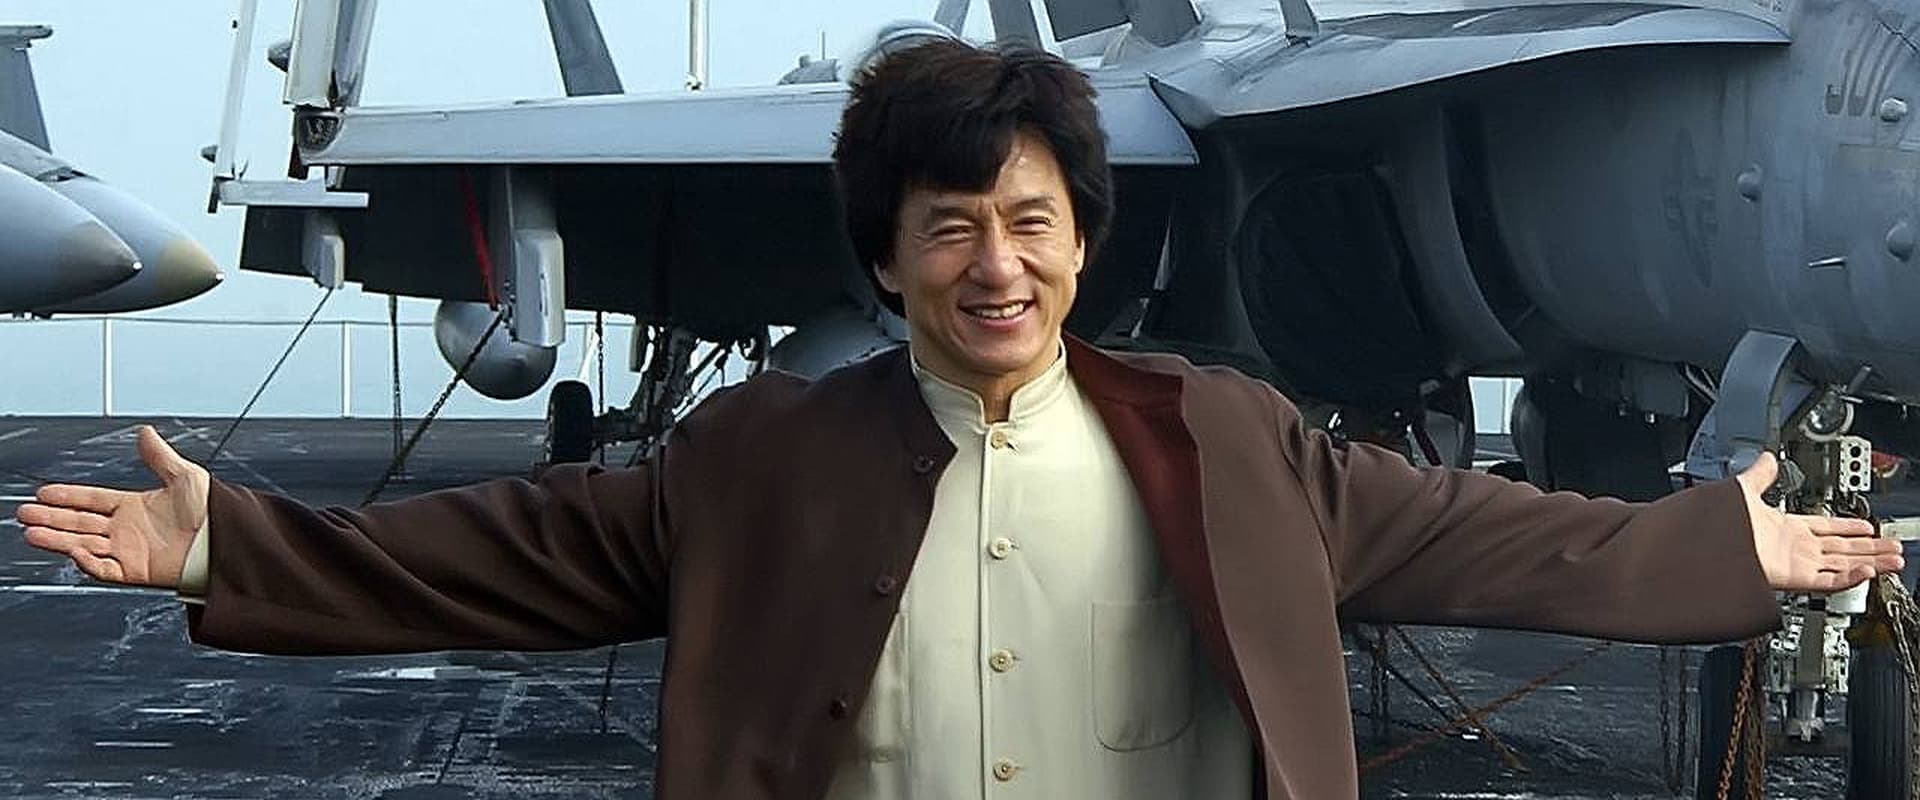 Jackie Chan: Building an Icon